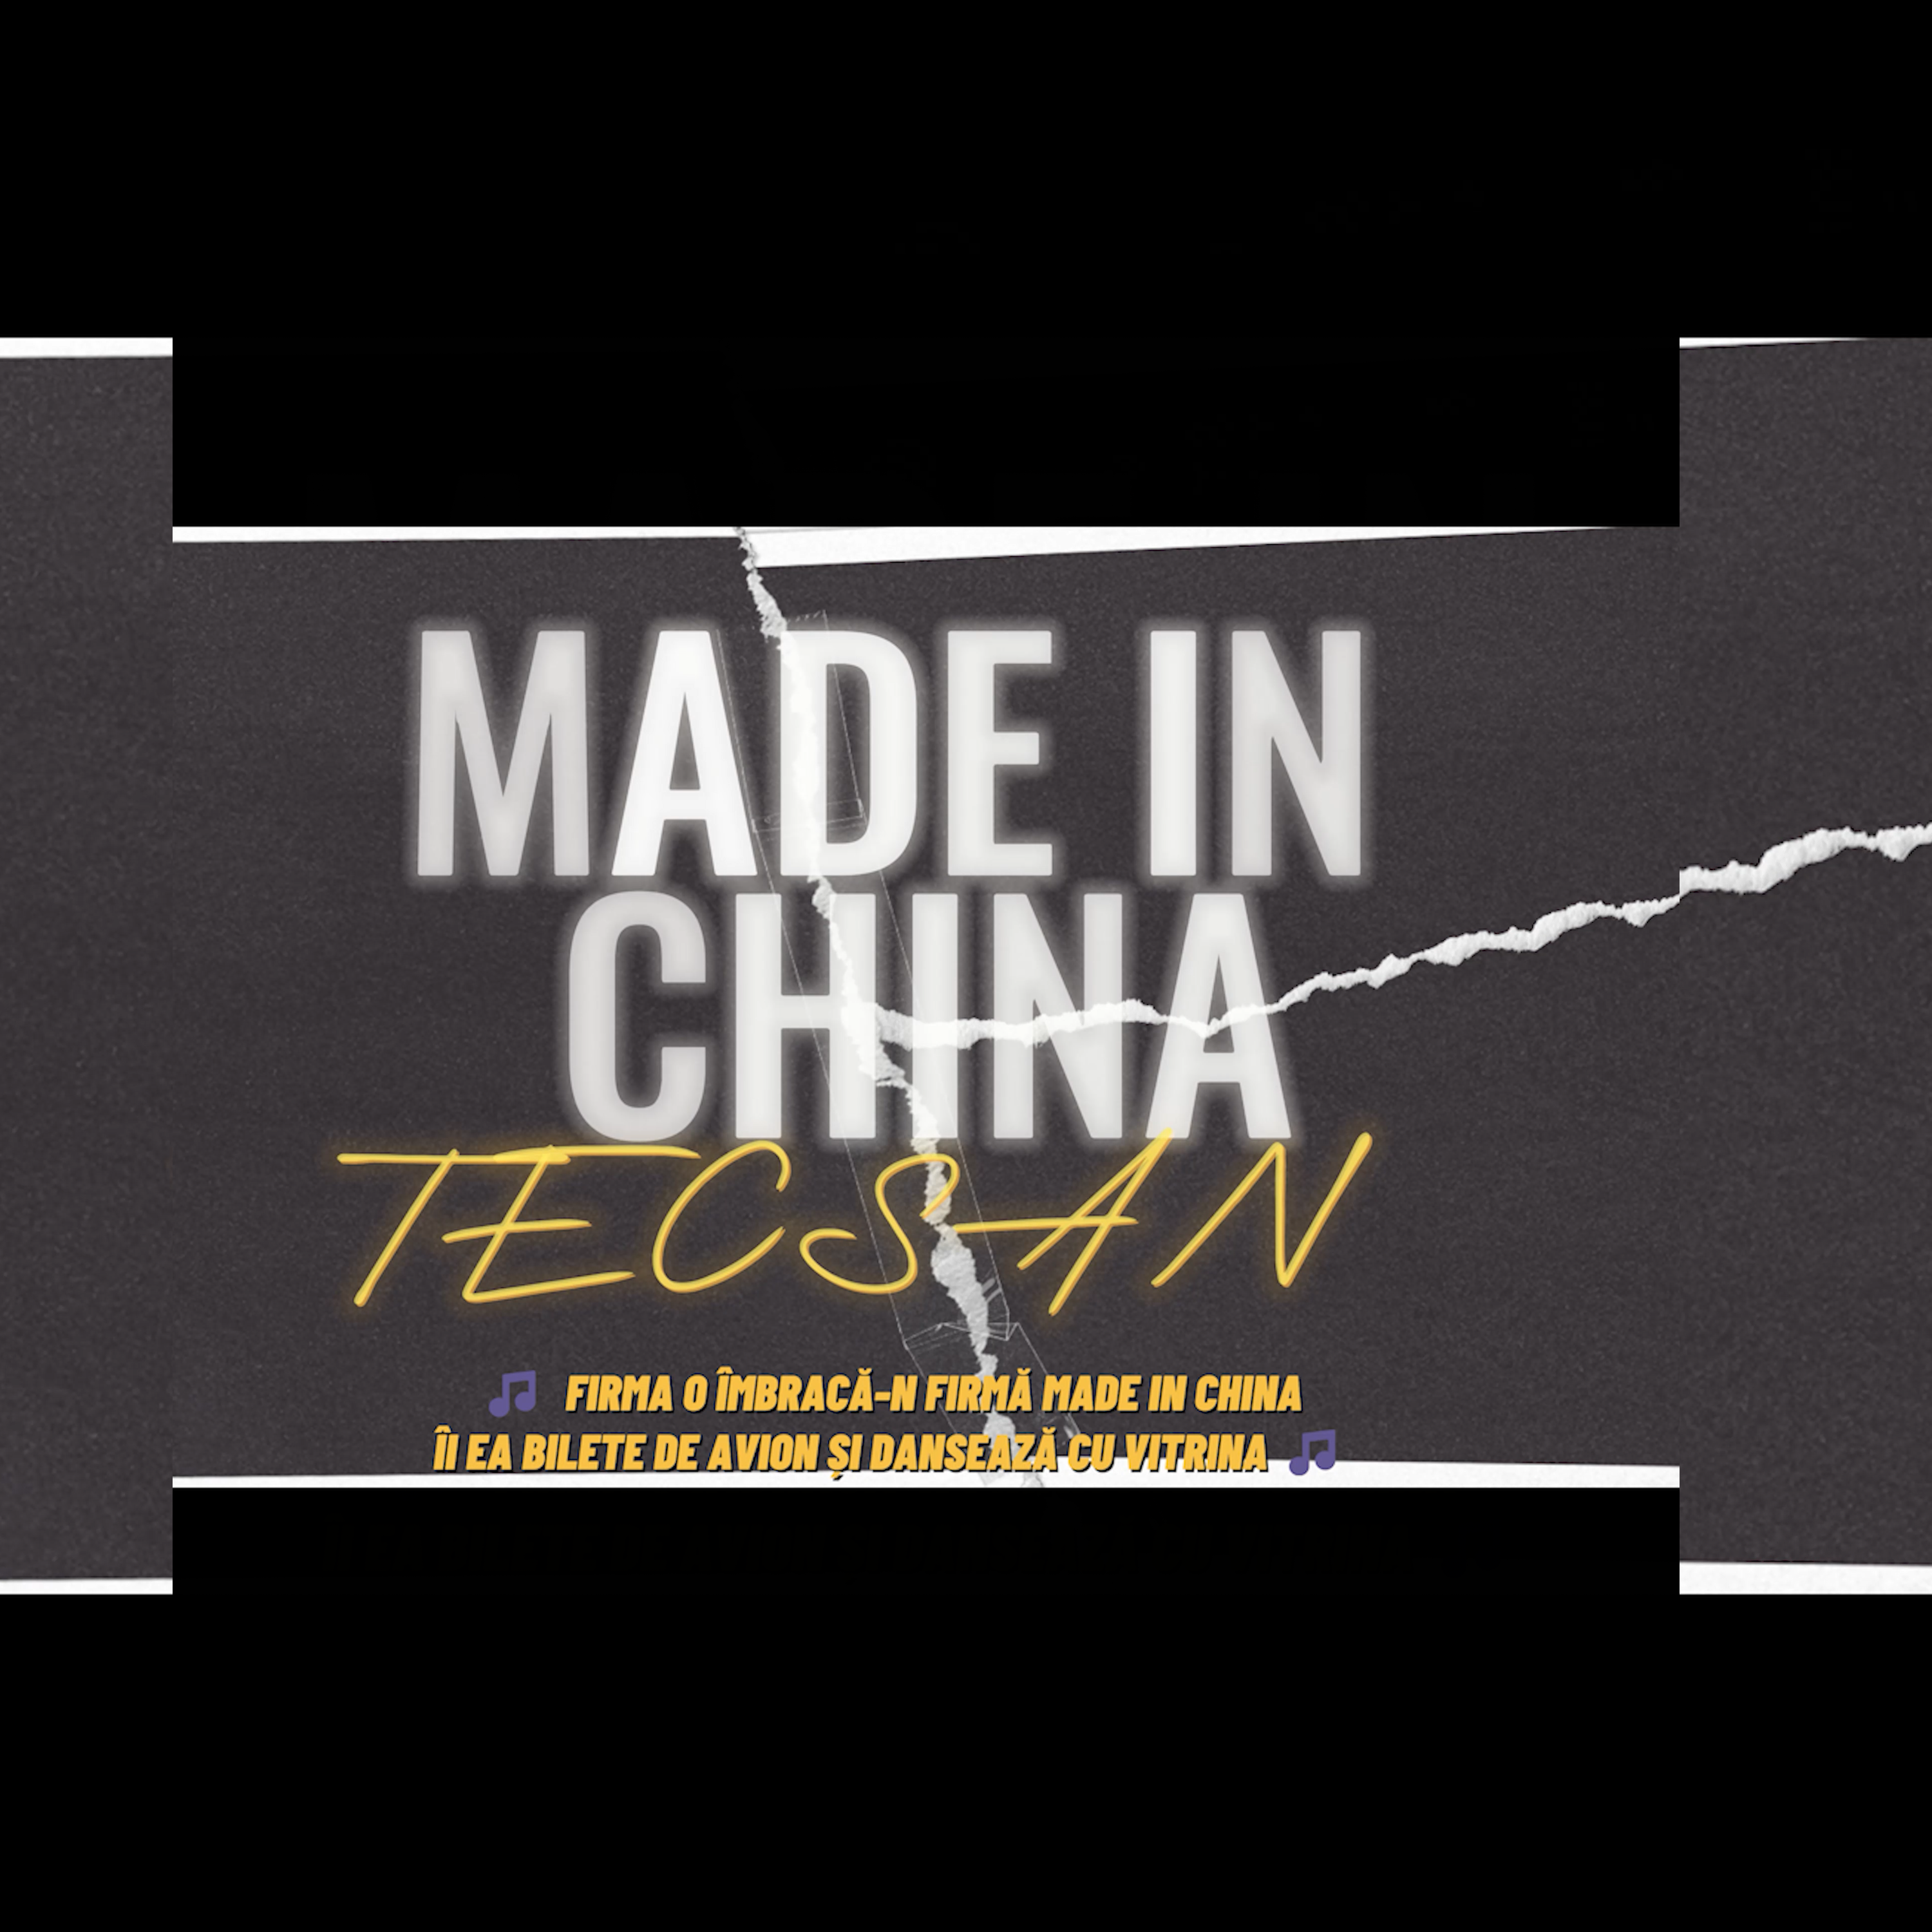 Tecsan feat. Cortes - Made in CHINA